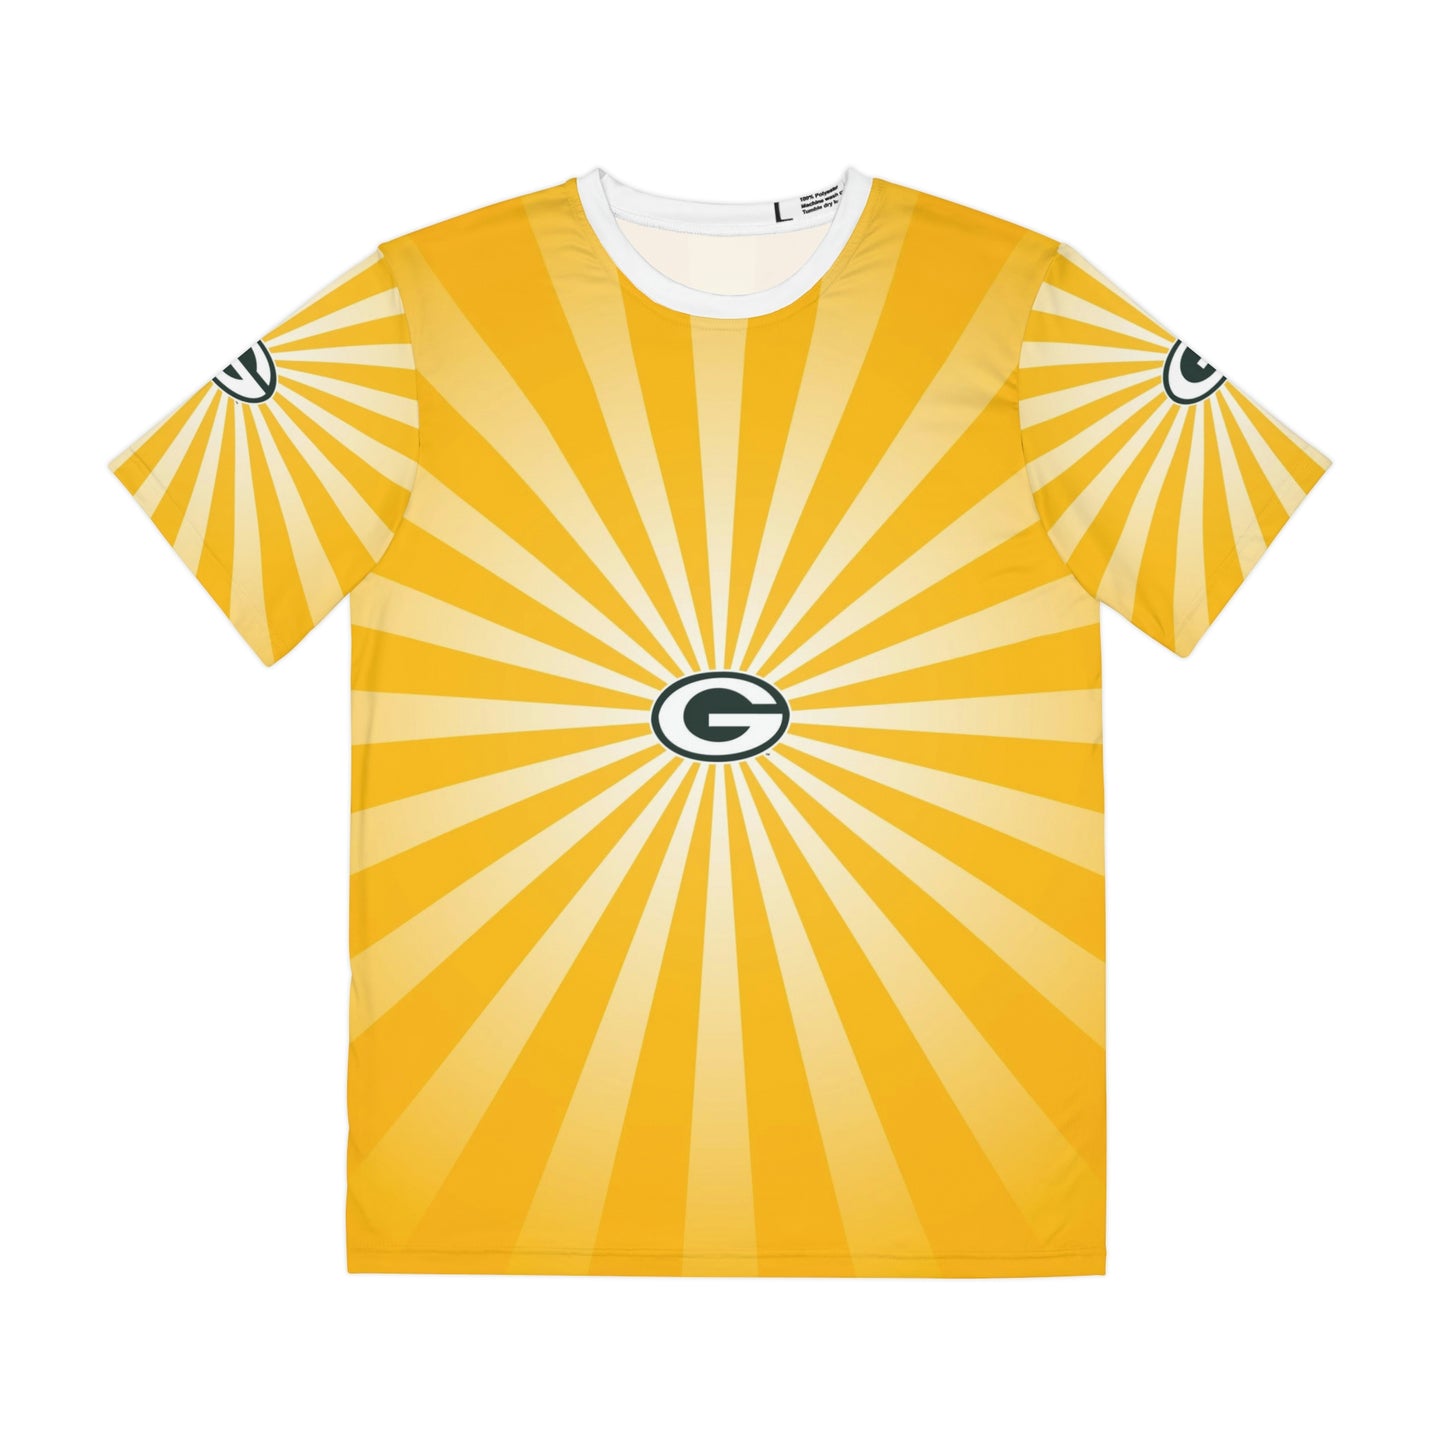 Geotrott NFL Green Bay Packers Men's Polyester All Over Print Tee T-Shirt